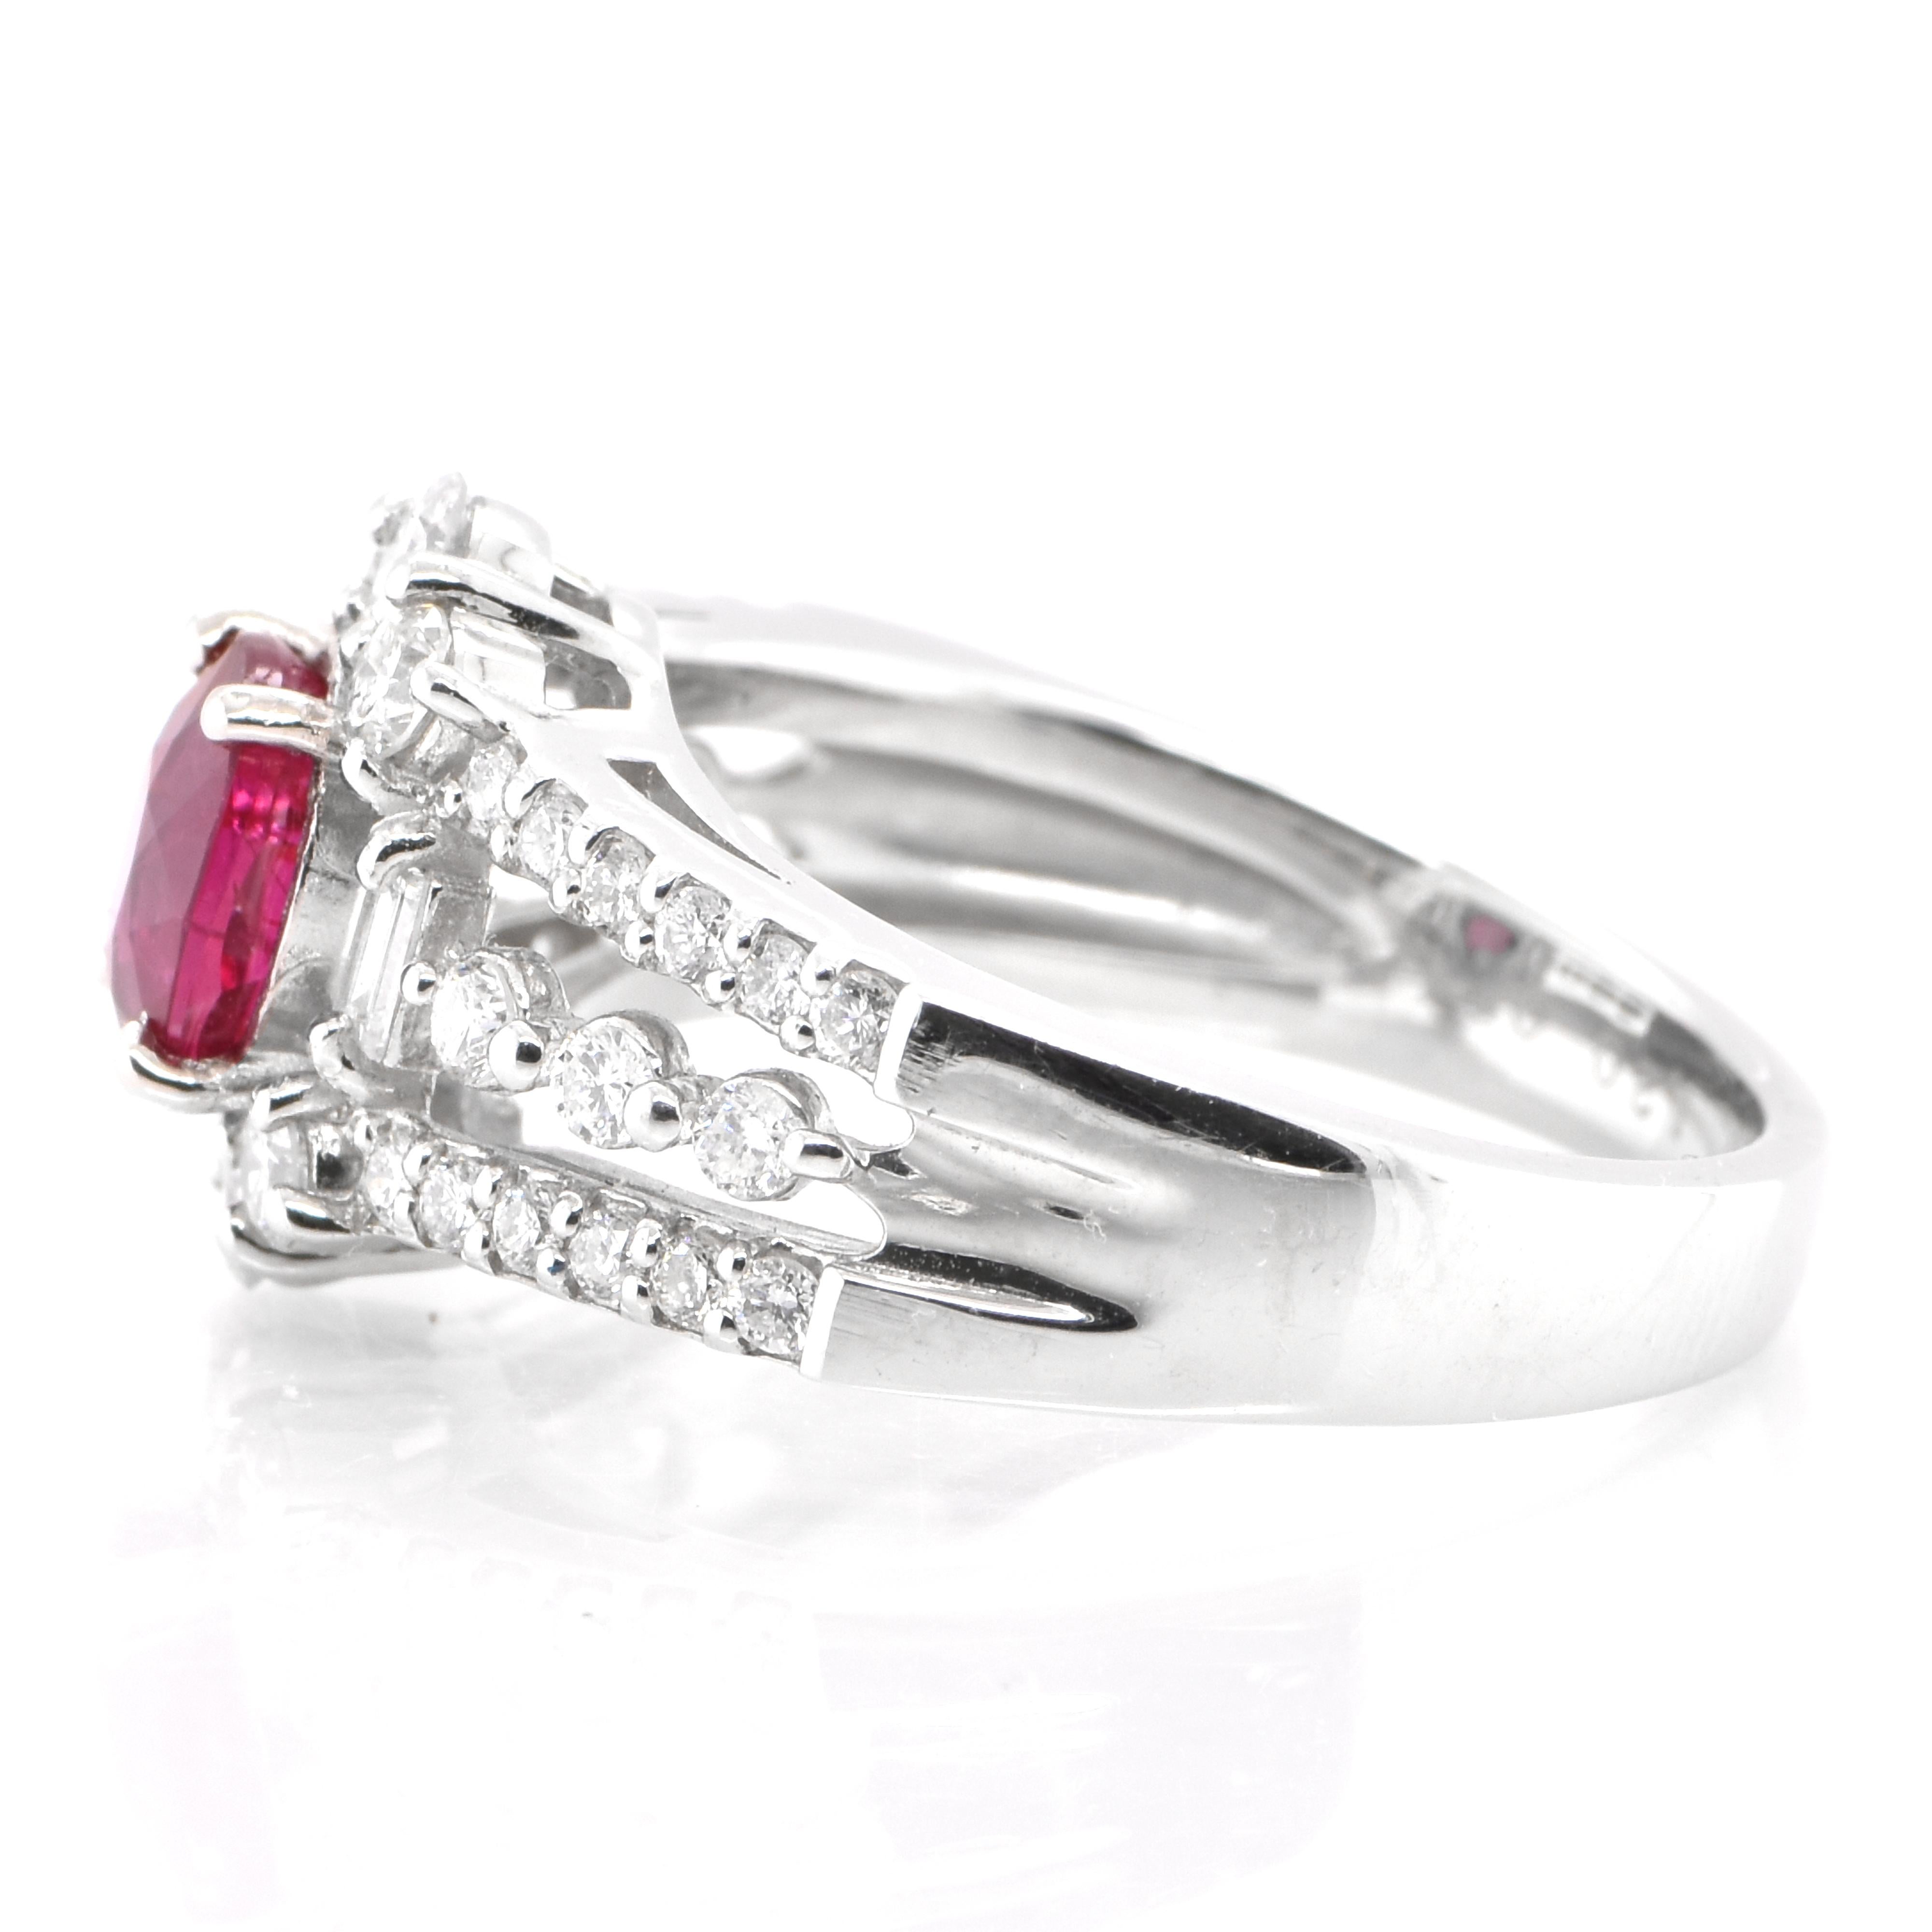 Oval Cut GIA Certified 1.20 Carat Natural Untreated Ruby and Diamond Ring Set in Platinum For Sale